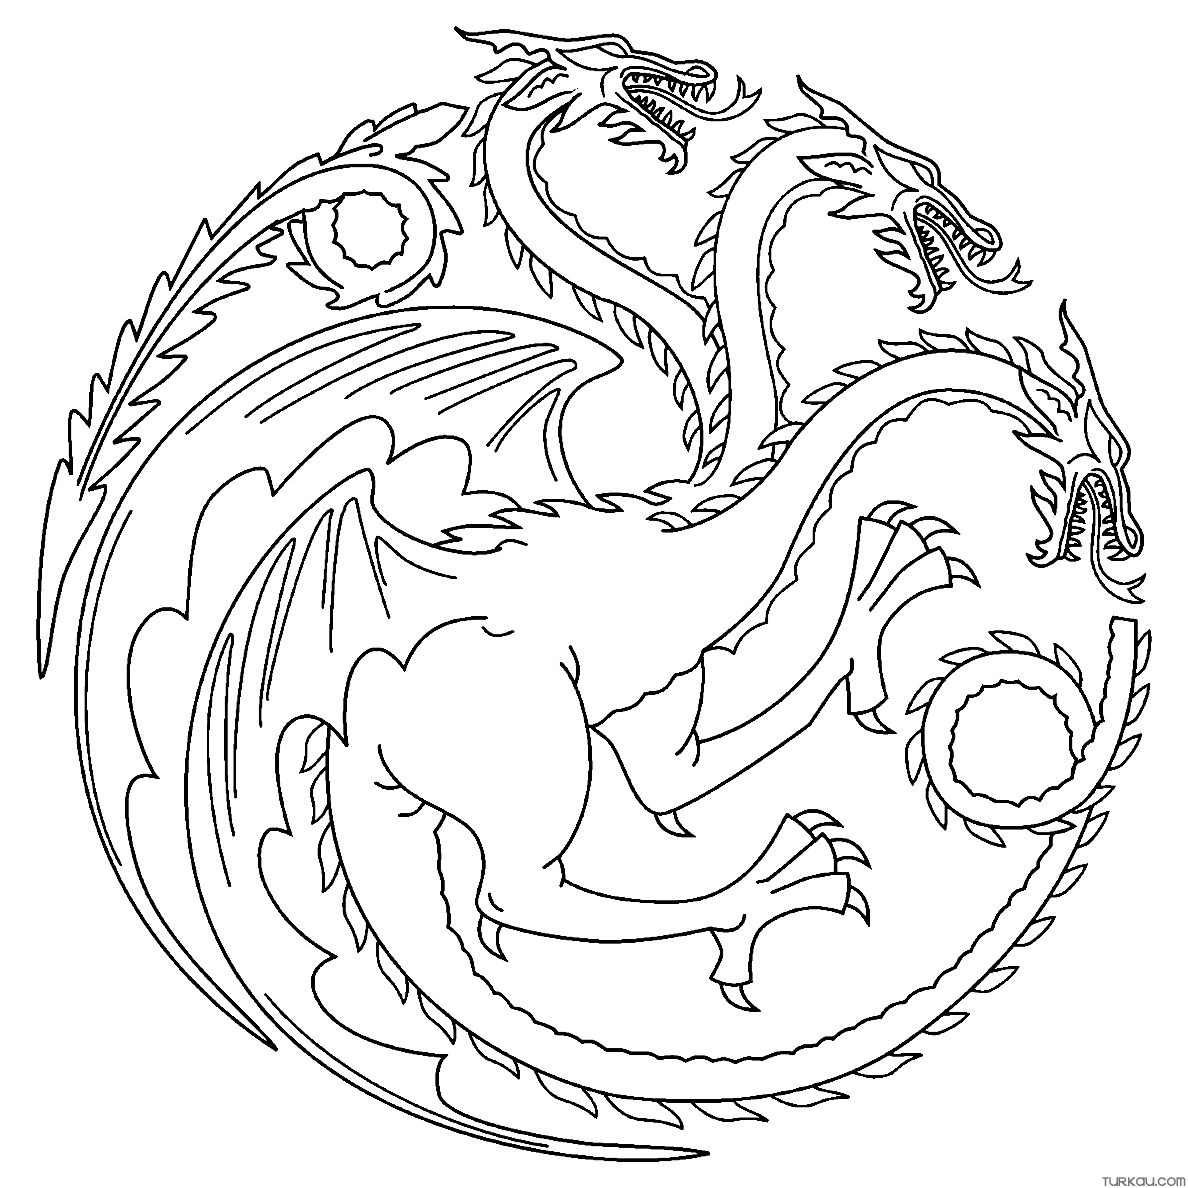 Three Headed Long Tailed Dragon Coloring Page » Turkau